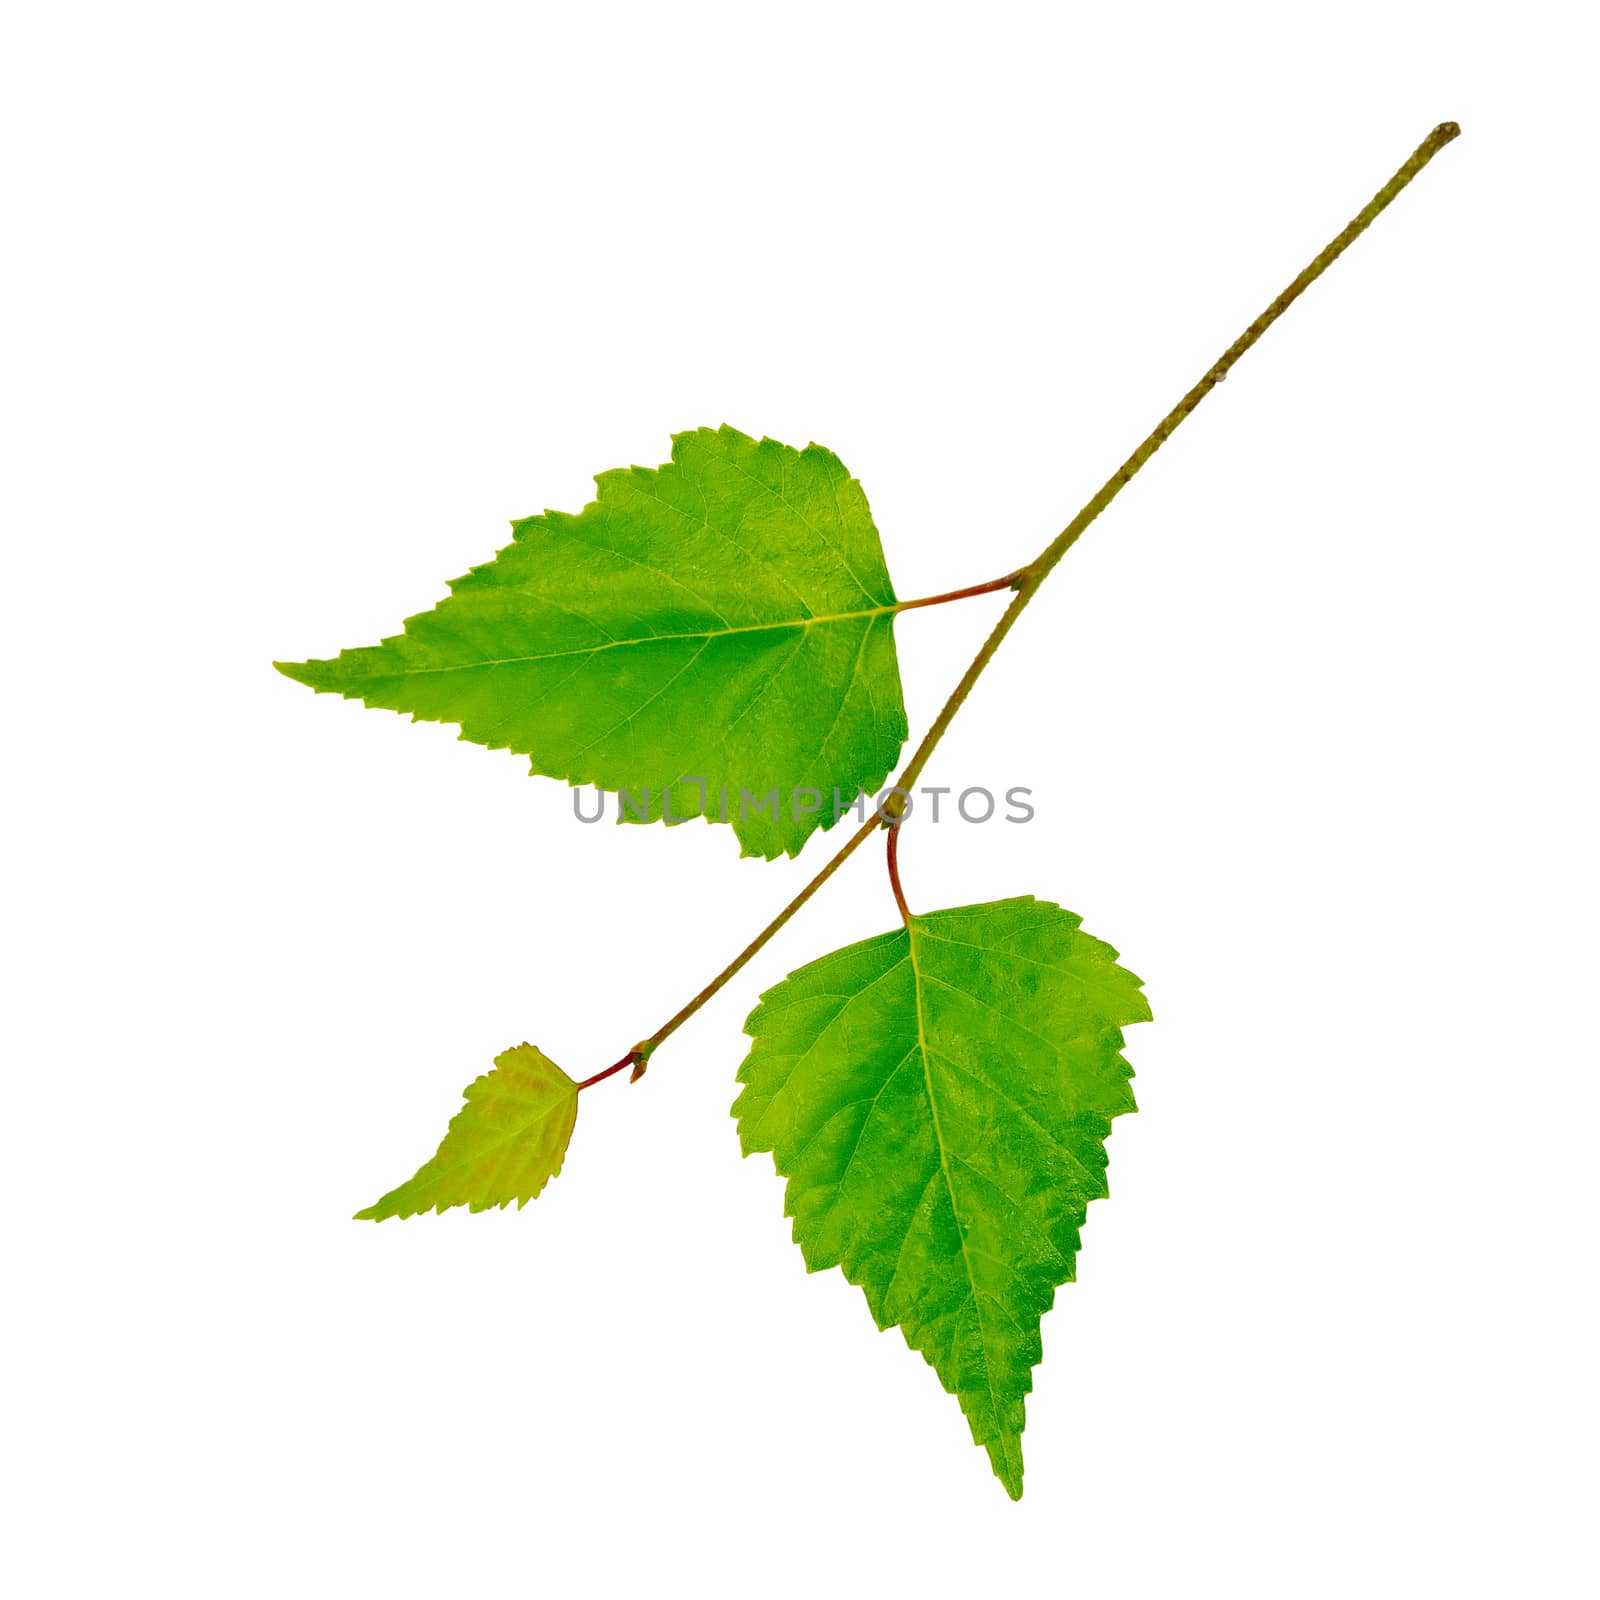 Birch twig with green leaves isolated on white background